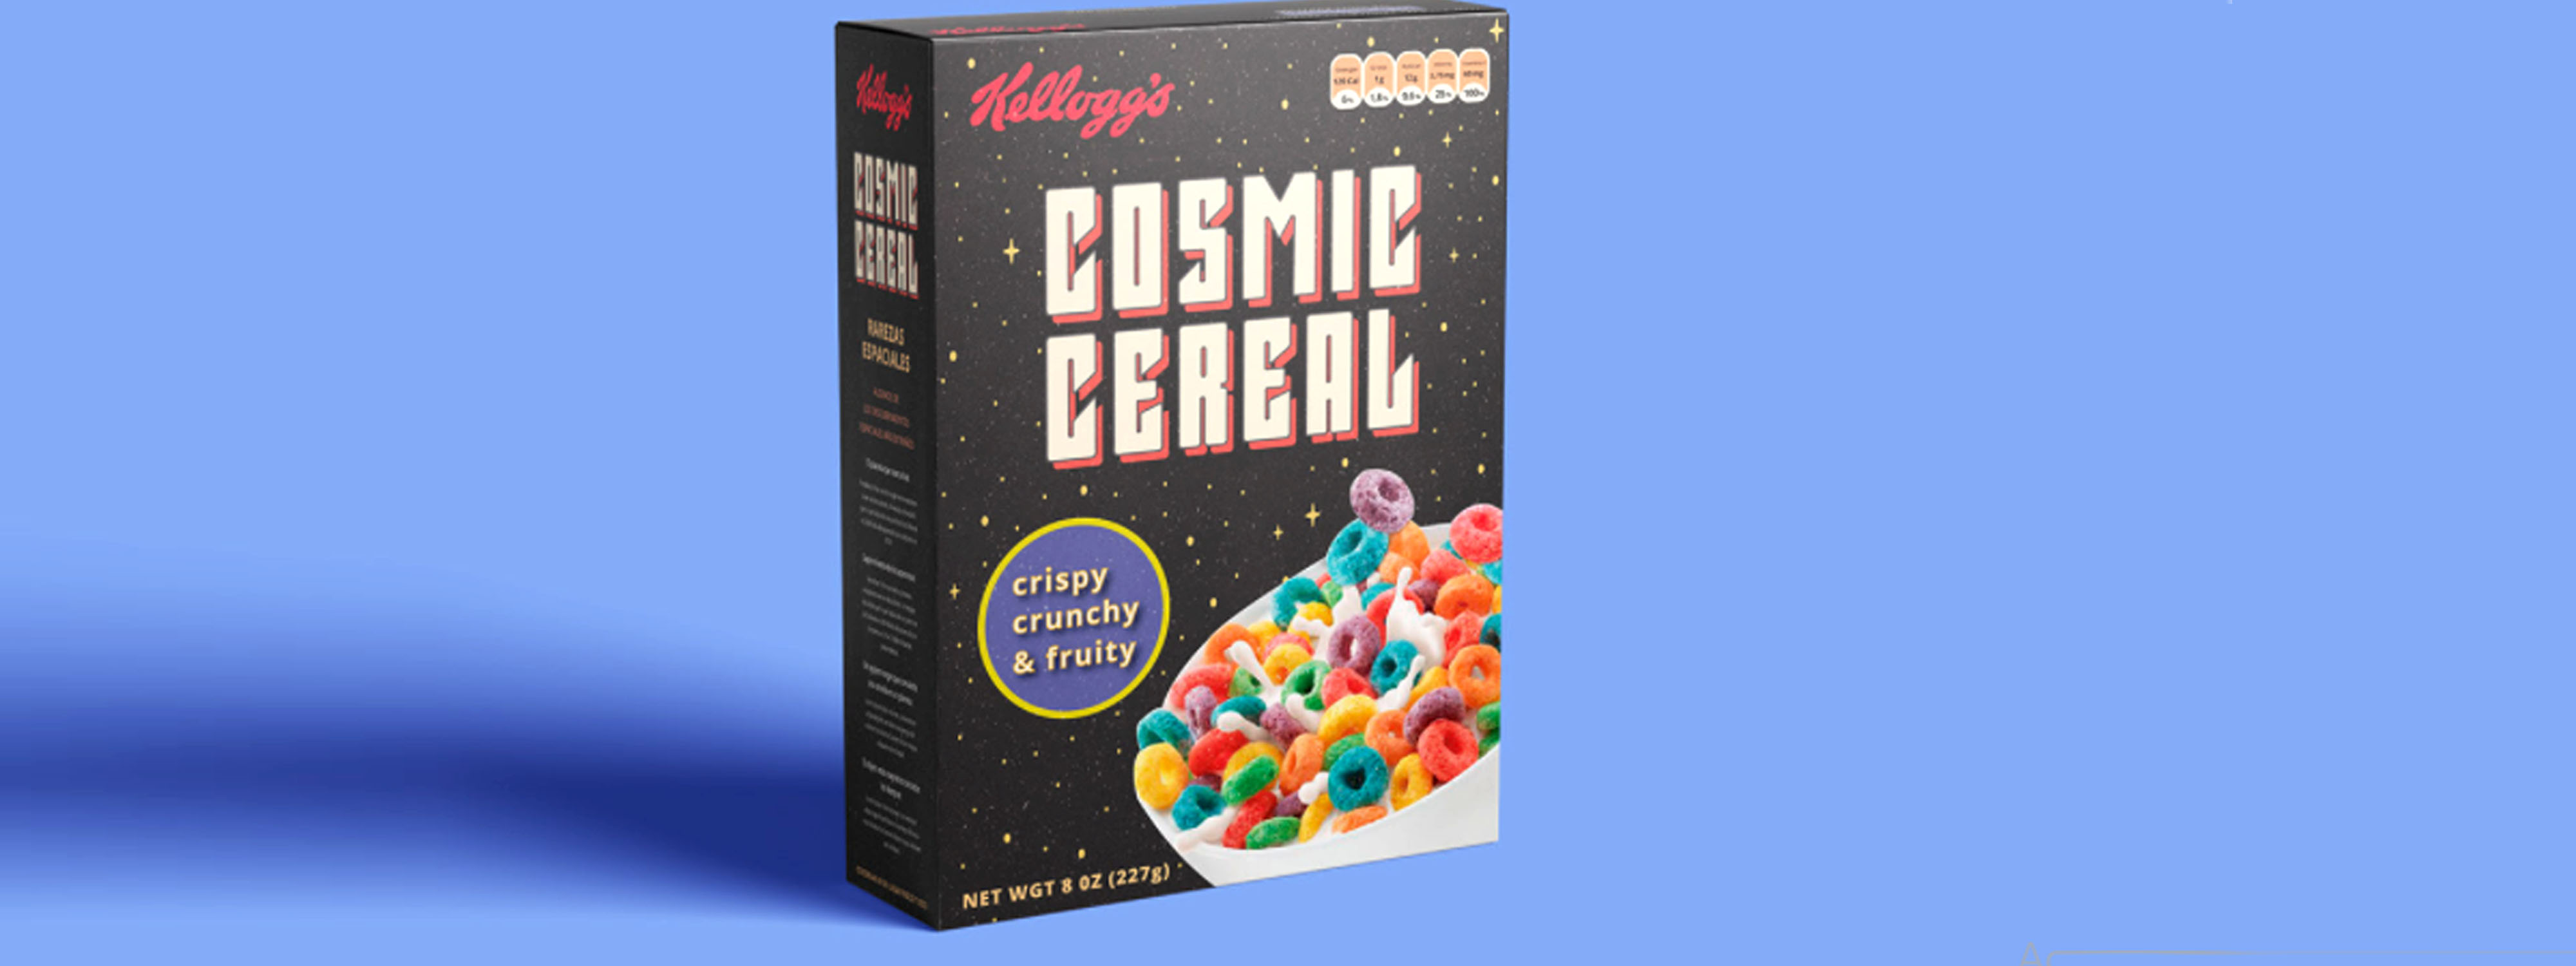 blank cereal boxes